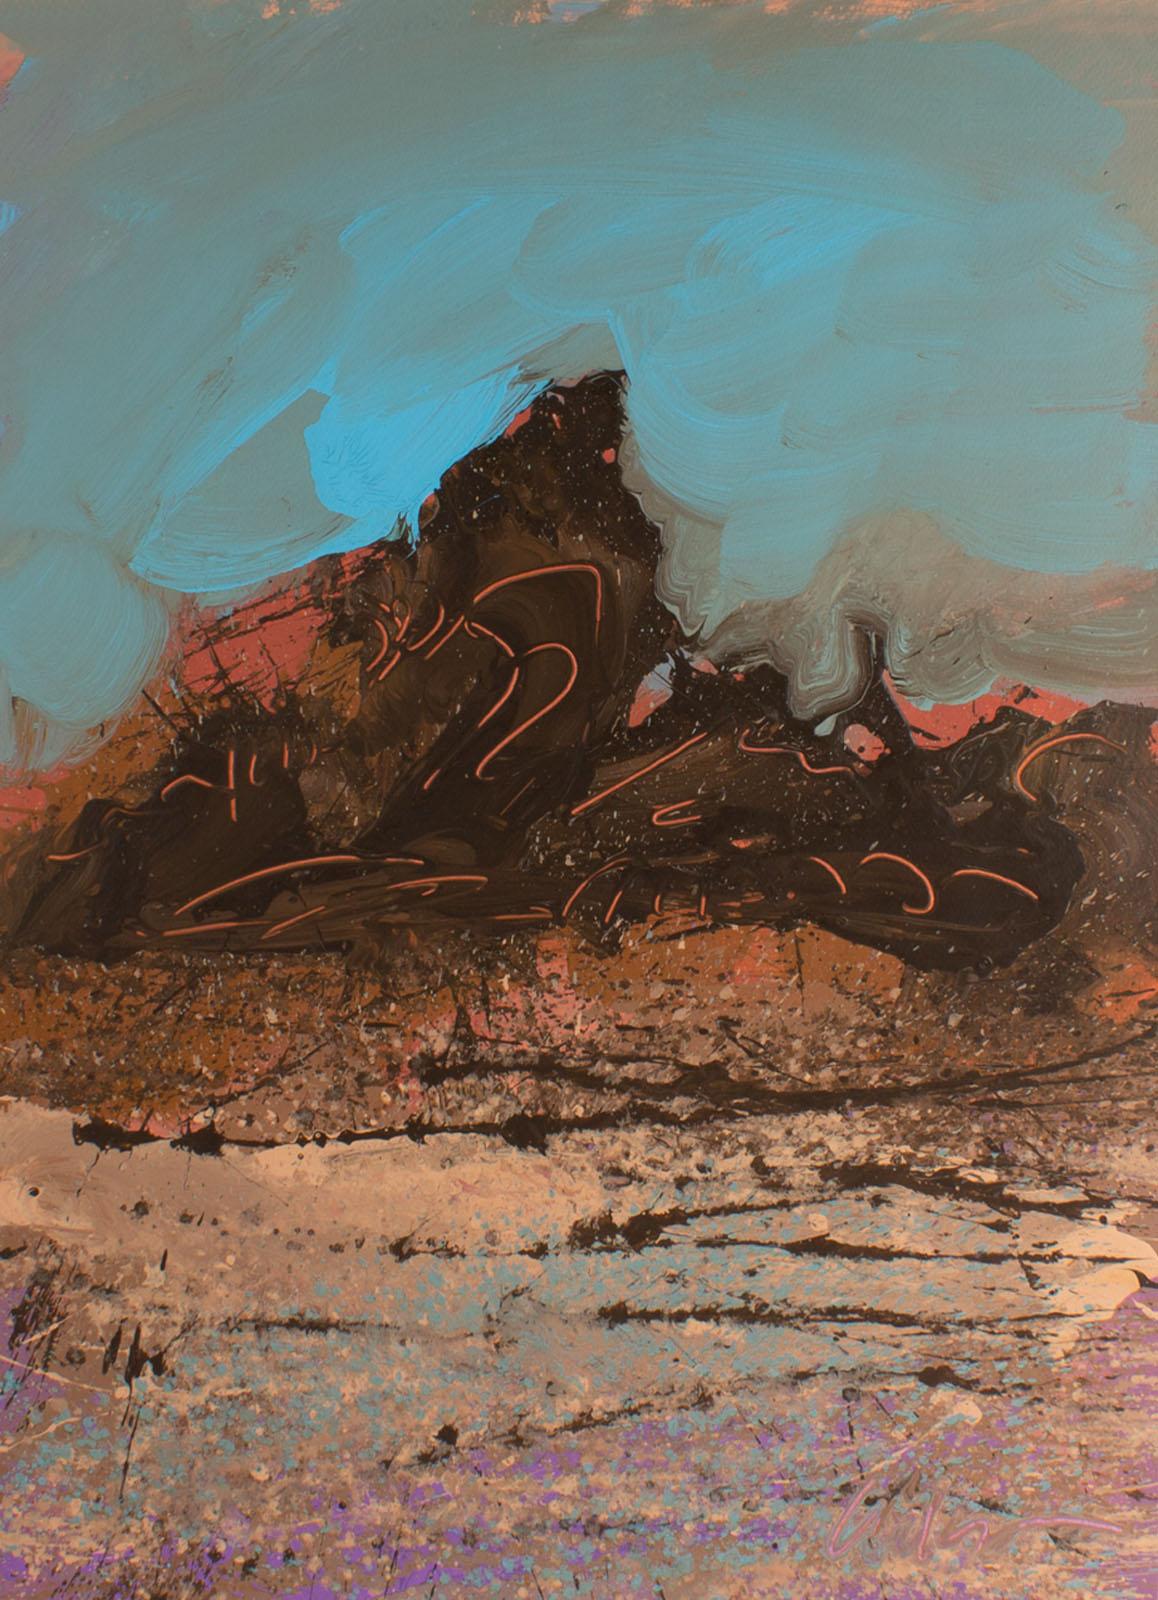 A 1980s abstract acrylic on paper mountainous landscape painting by American artist Harry Hilson (1935-2004). Gestural lines come together to create a vibrant abstract landscape with brown and pink mountains in the background and pink and blue